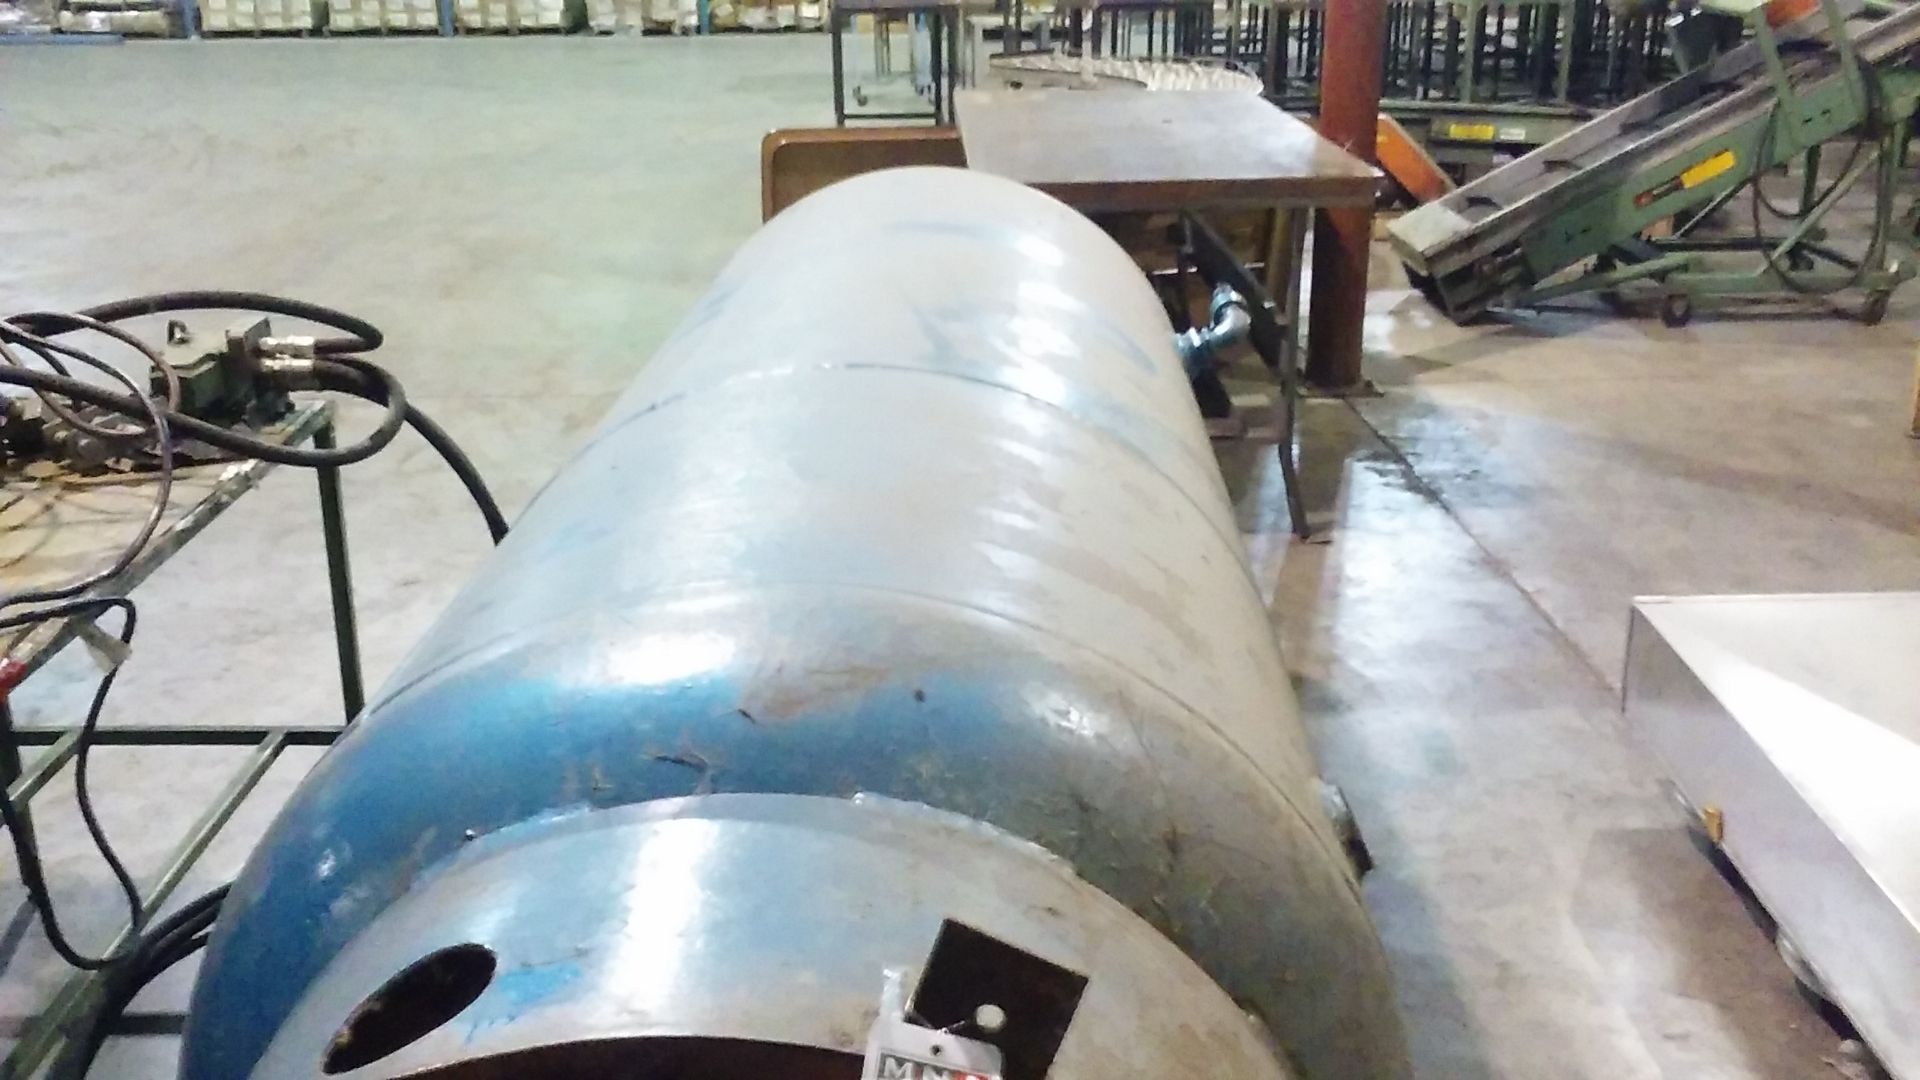 LARGE AIR TANK FOR BLOW MOLD MACHINE - Image 2 of 4